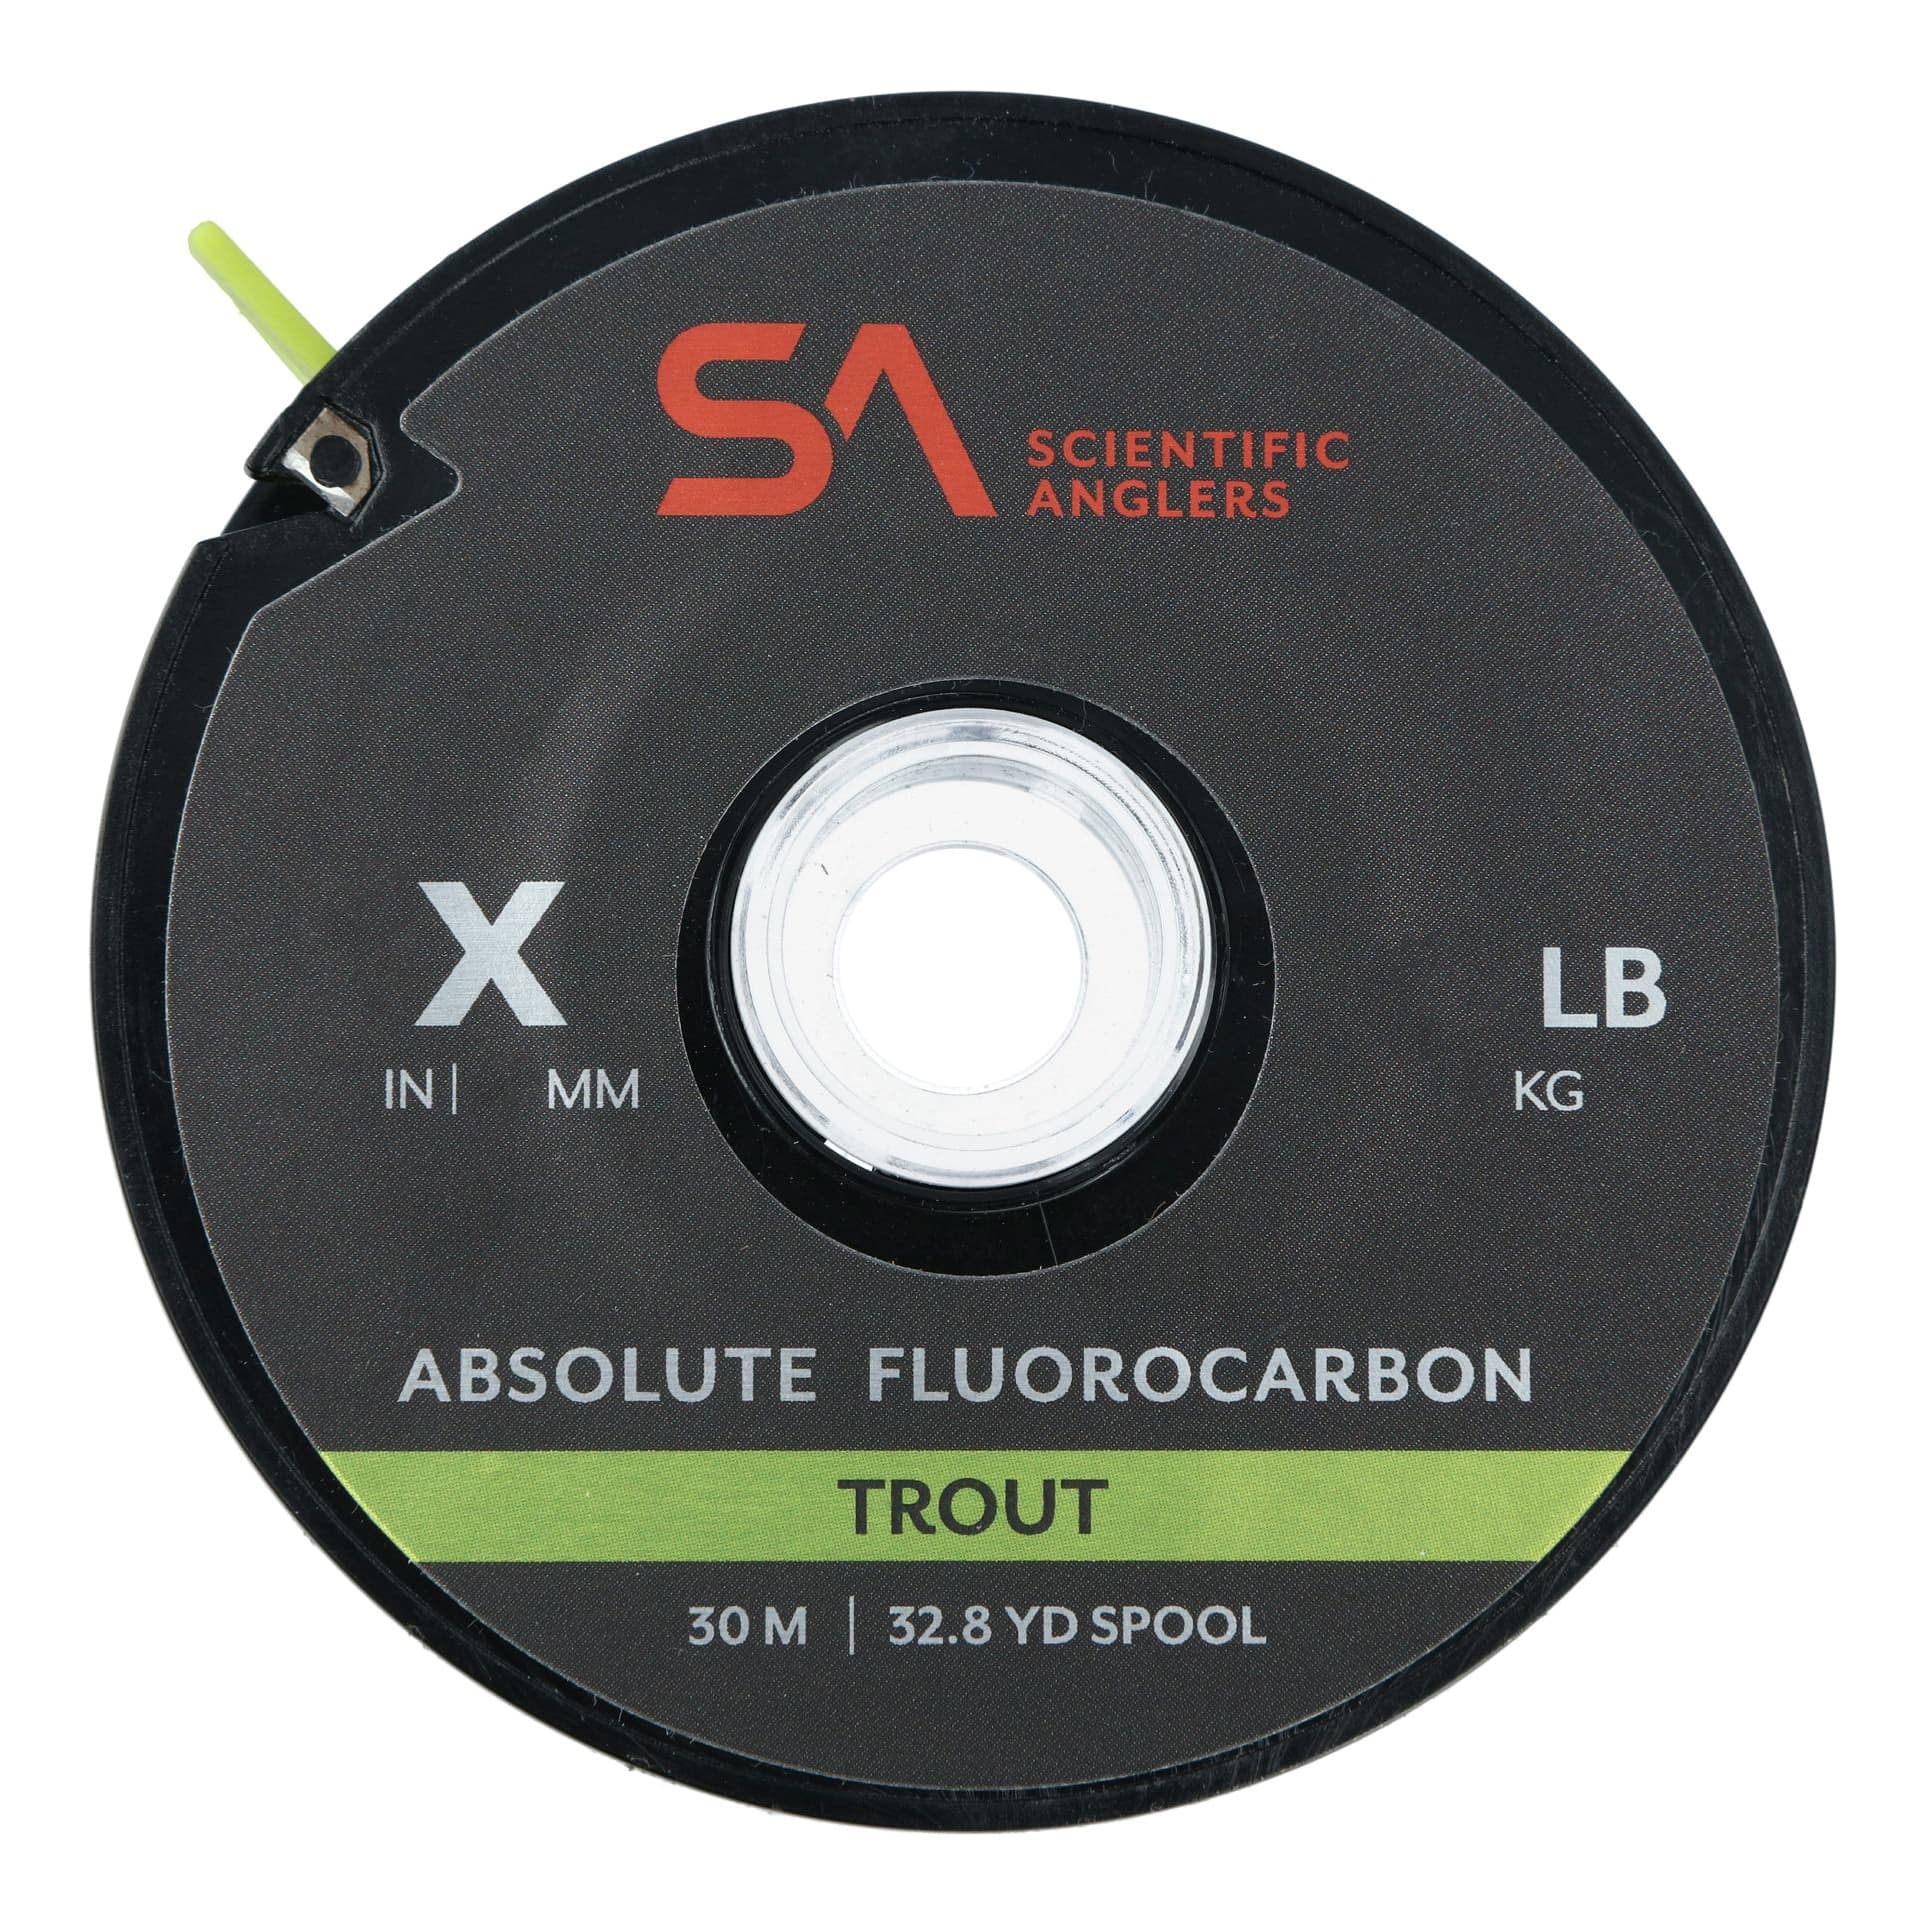 Scientific Anglers Absolute Fluorocarbon Trout Tippet, 5X